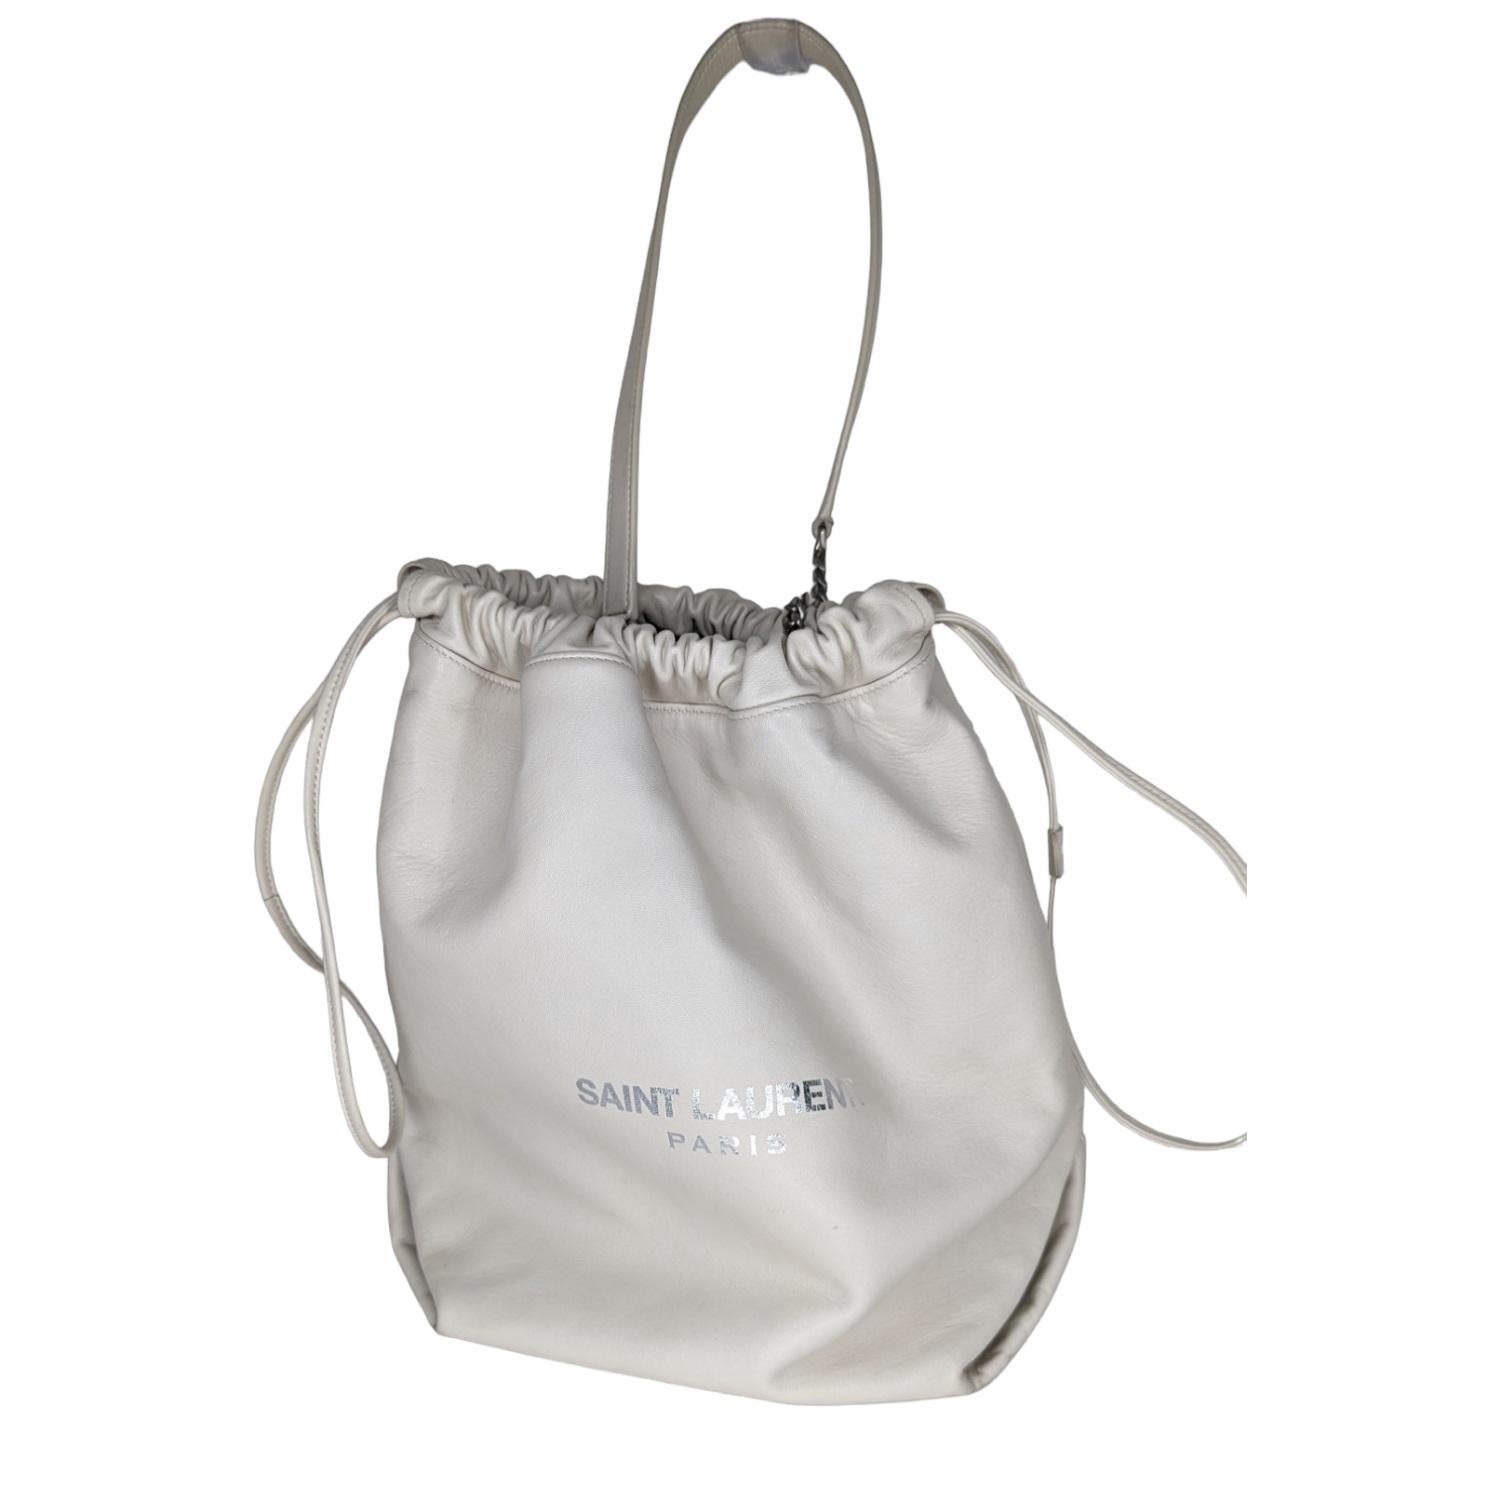 This classic bucket shape is crafted of rich smooth lambskin in off white. The bag features a drawstring top and a chain shoulder strap with a leather shoulder strap. The top opens to a spacious black fabric interior.

Designer: YSL Saint